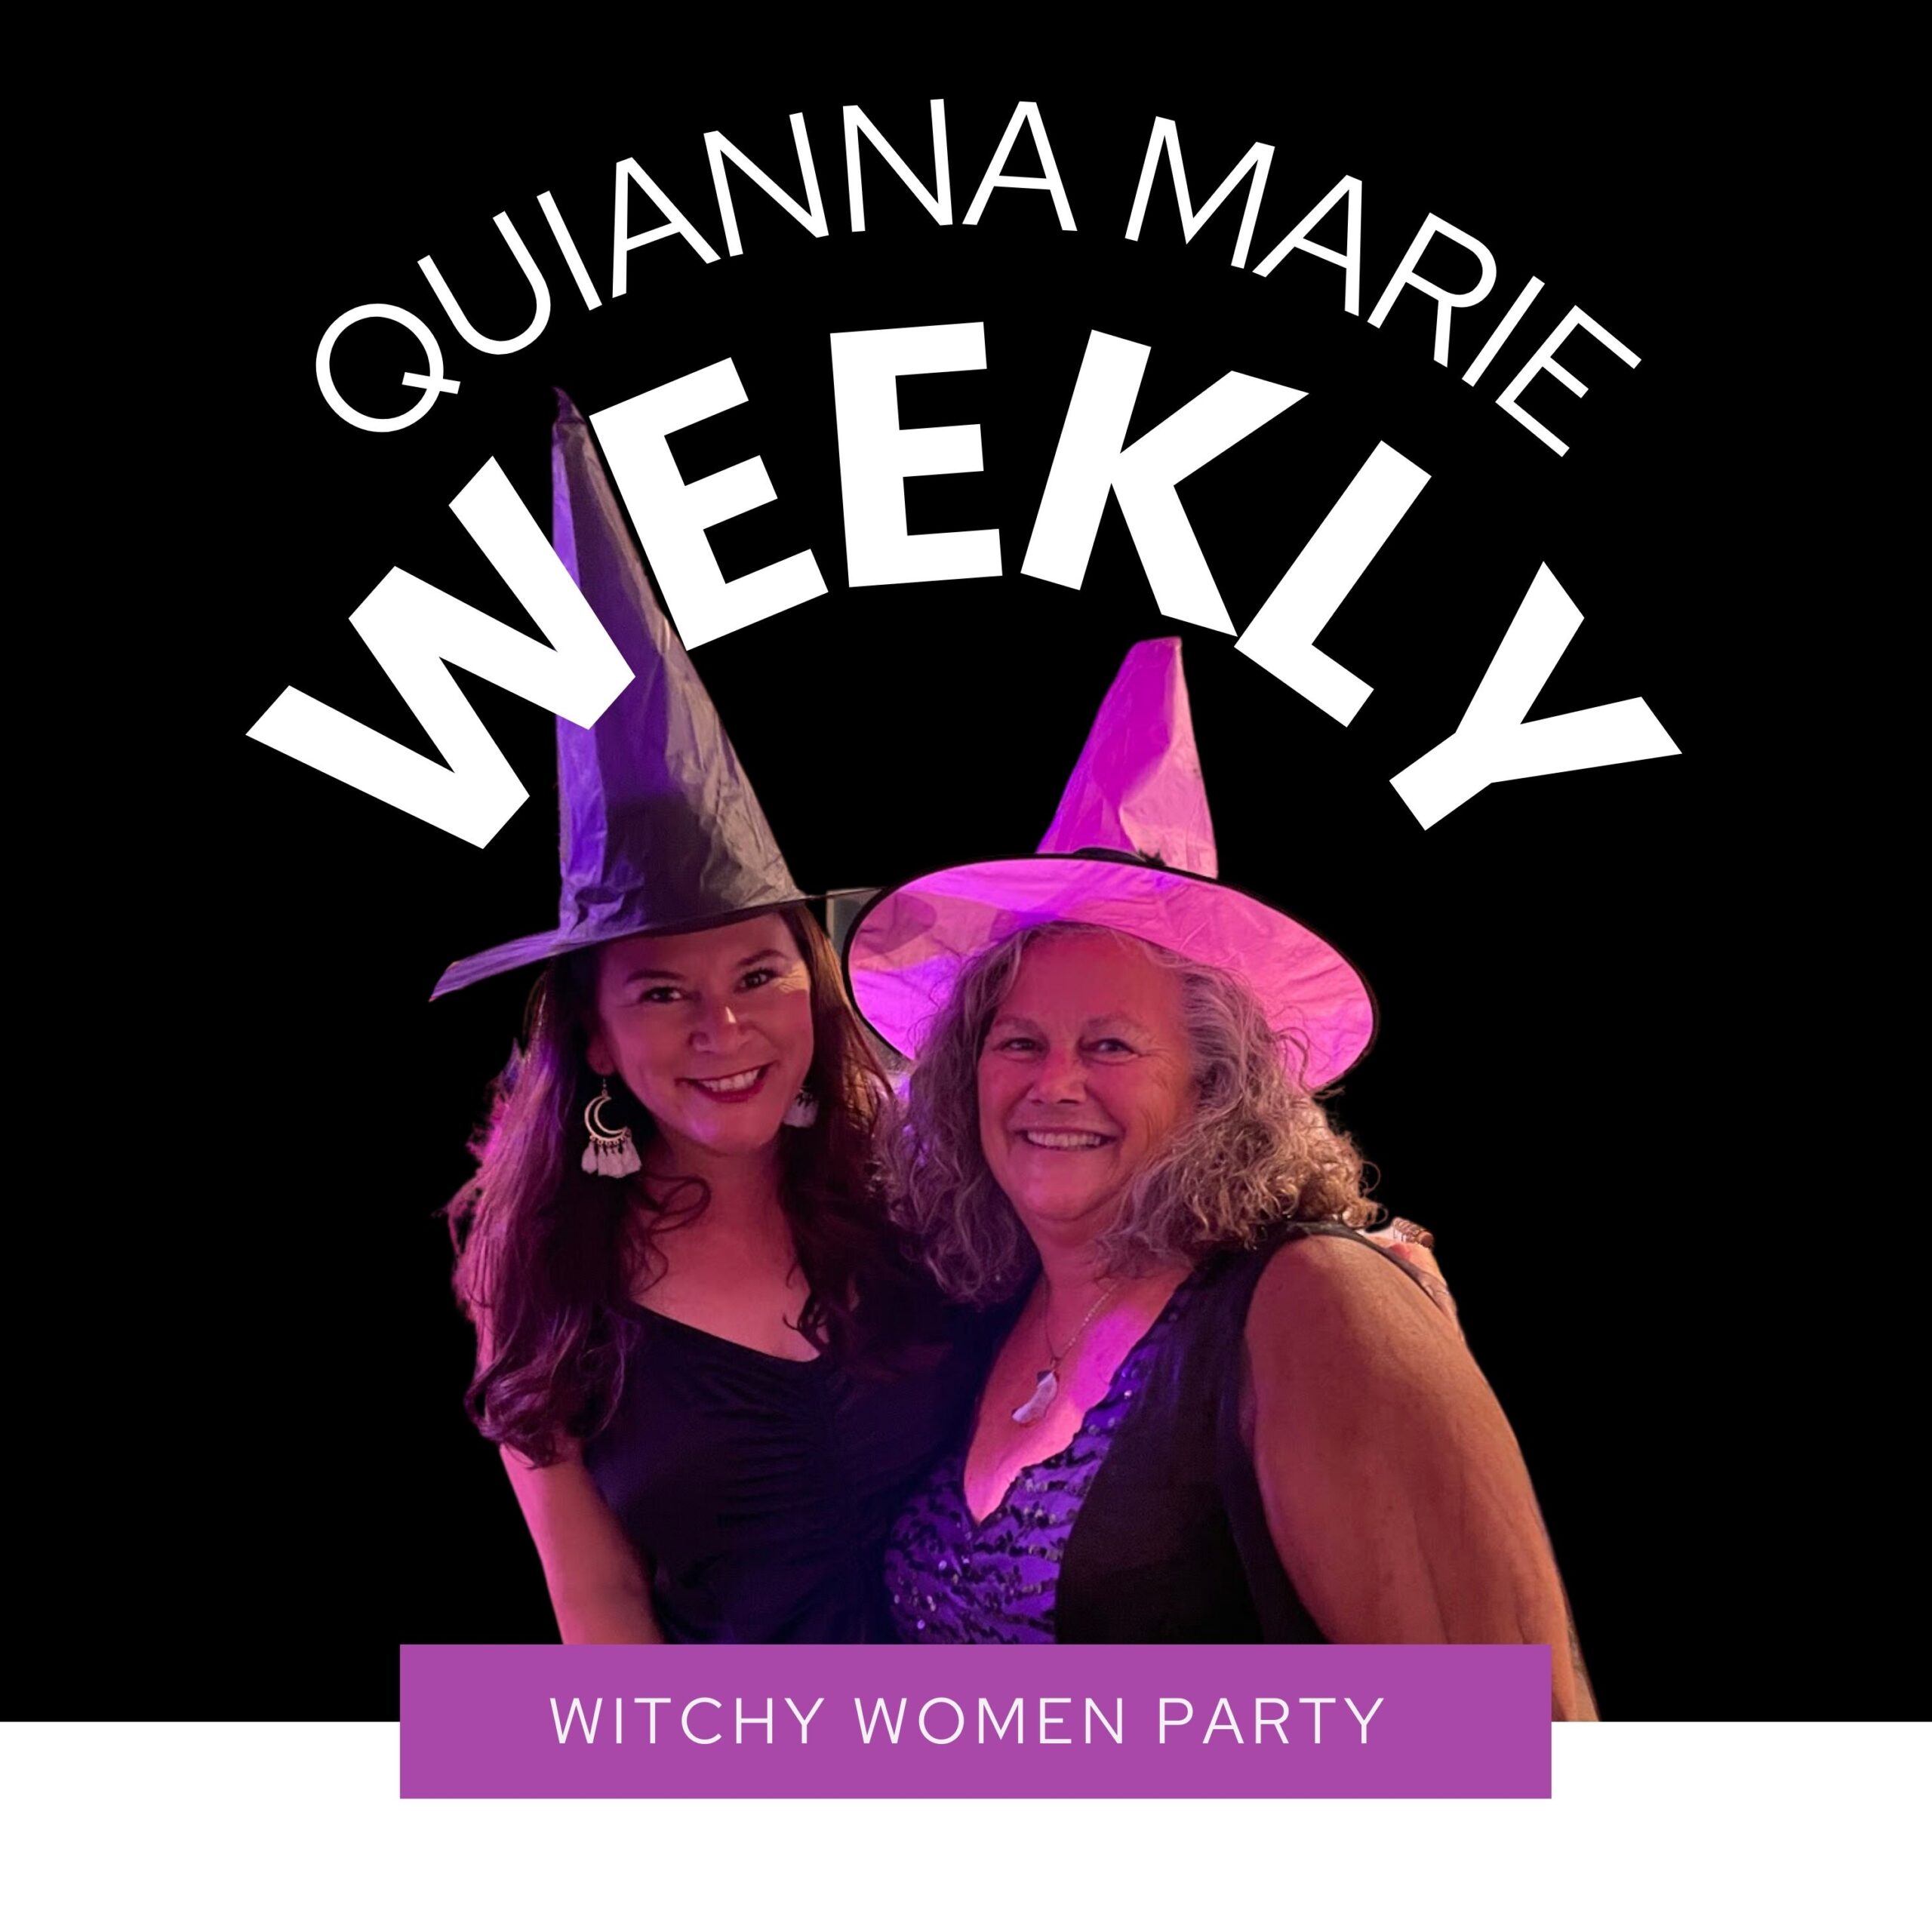 Witchy Women Party with Quianna Marie